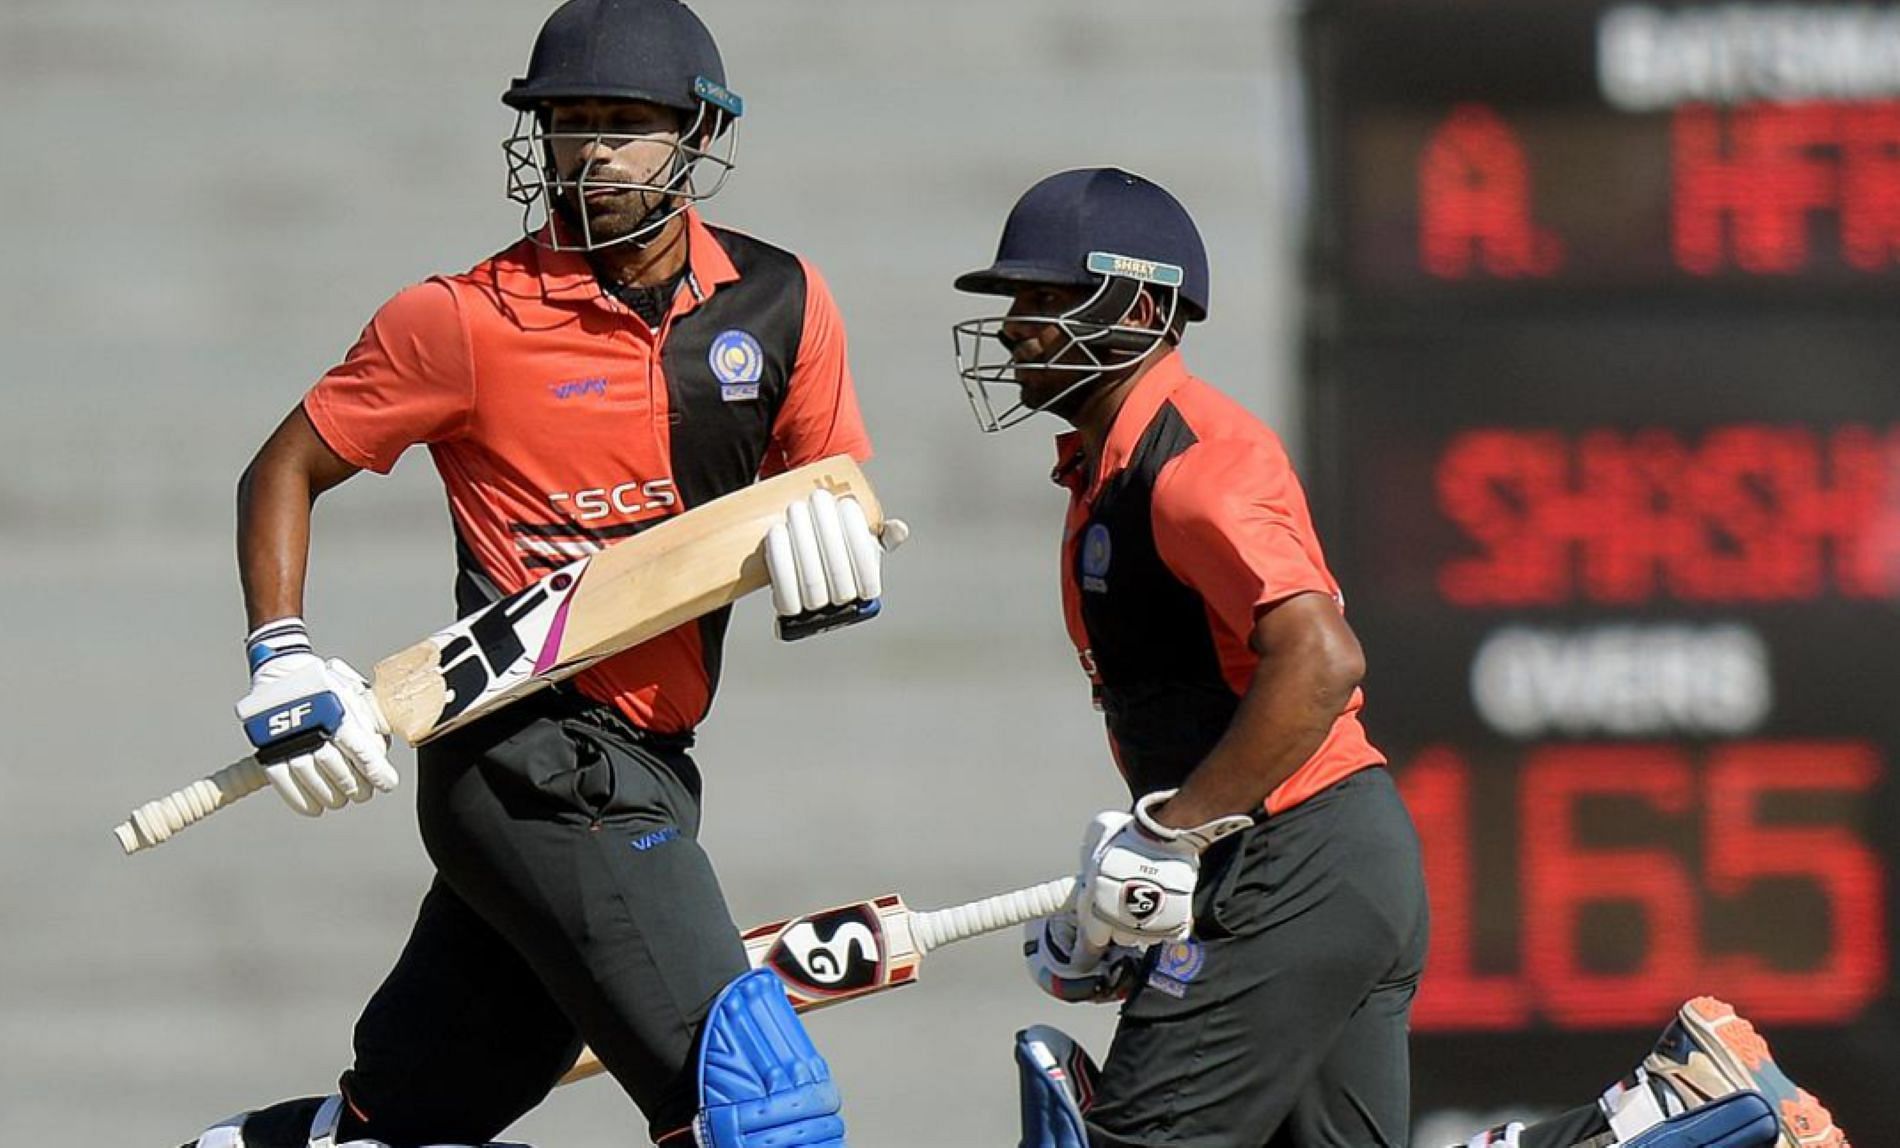 Shashank Singh achieved a magnifecent double during the Manipur clash.